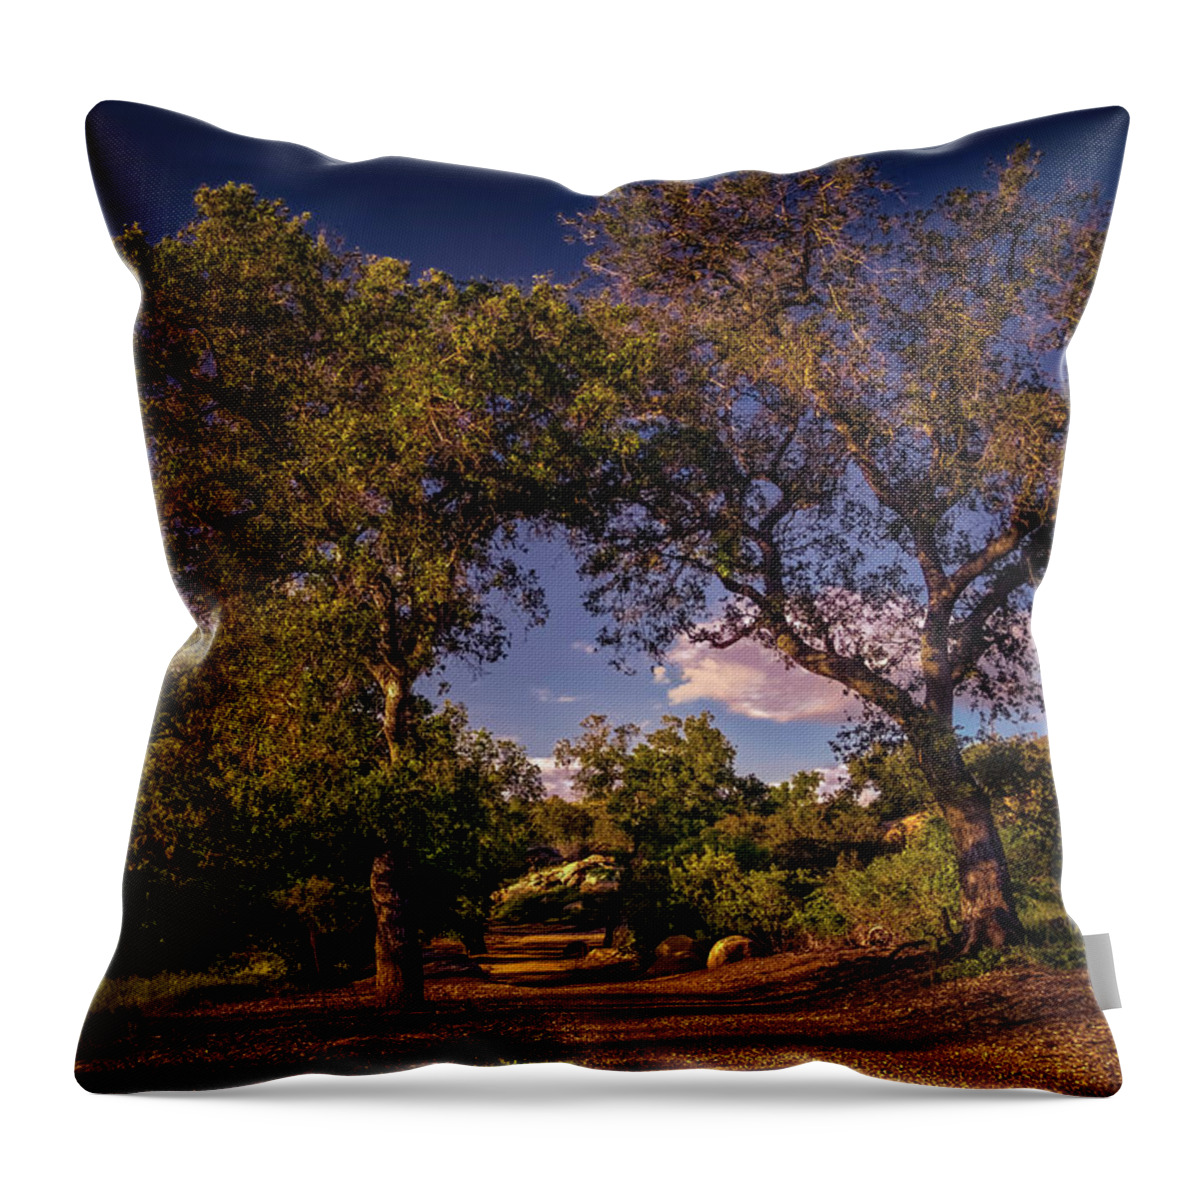 Oak Trees Throw Pillow featuring the photograph Two Old Oak Trees At Sunset by Endre Balogh